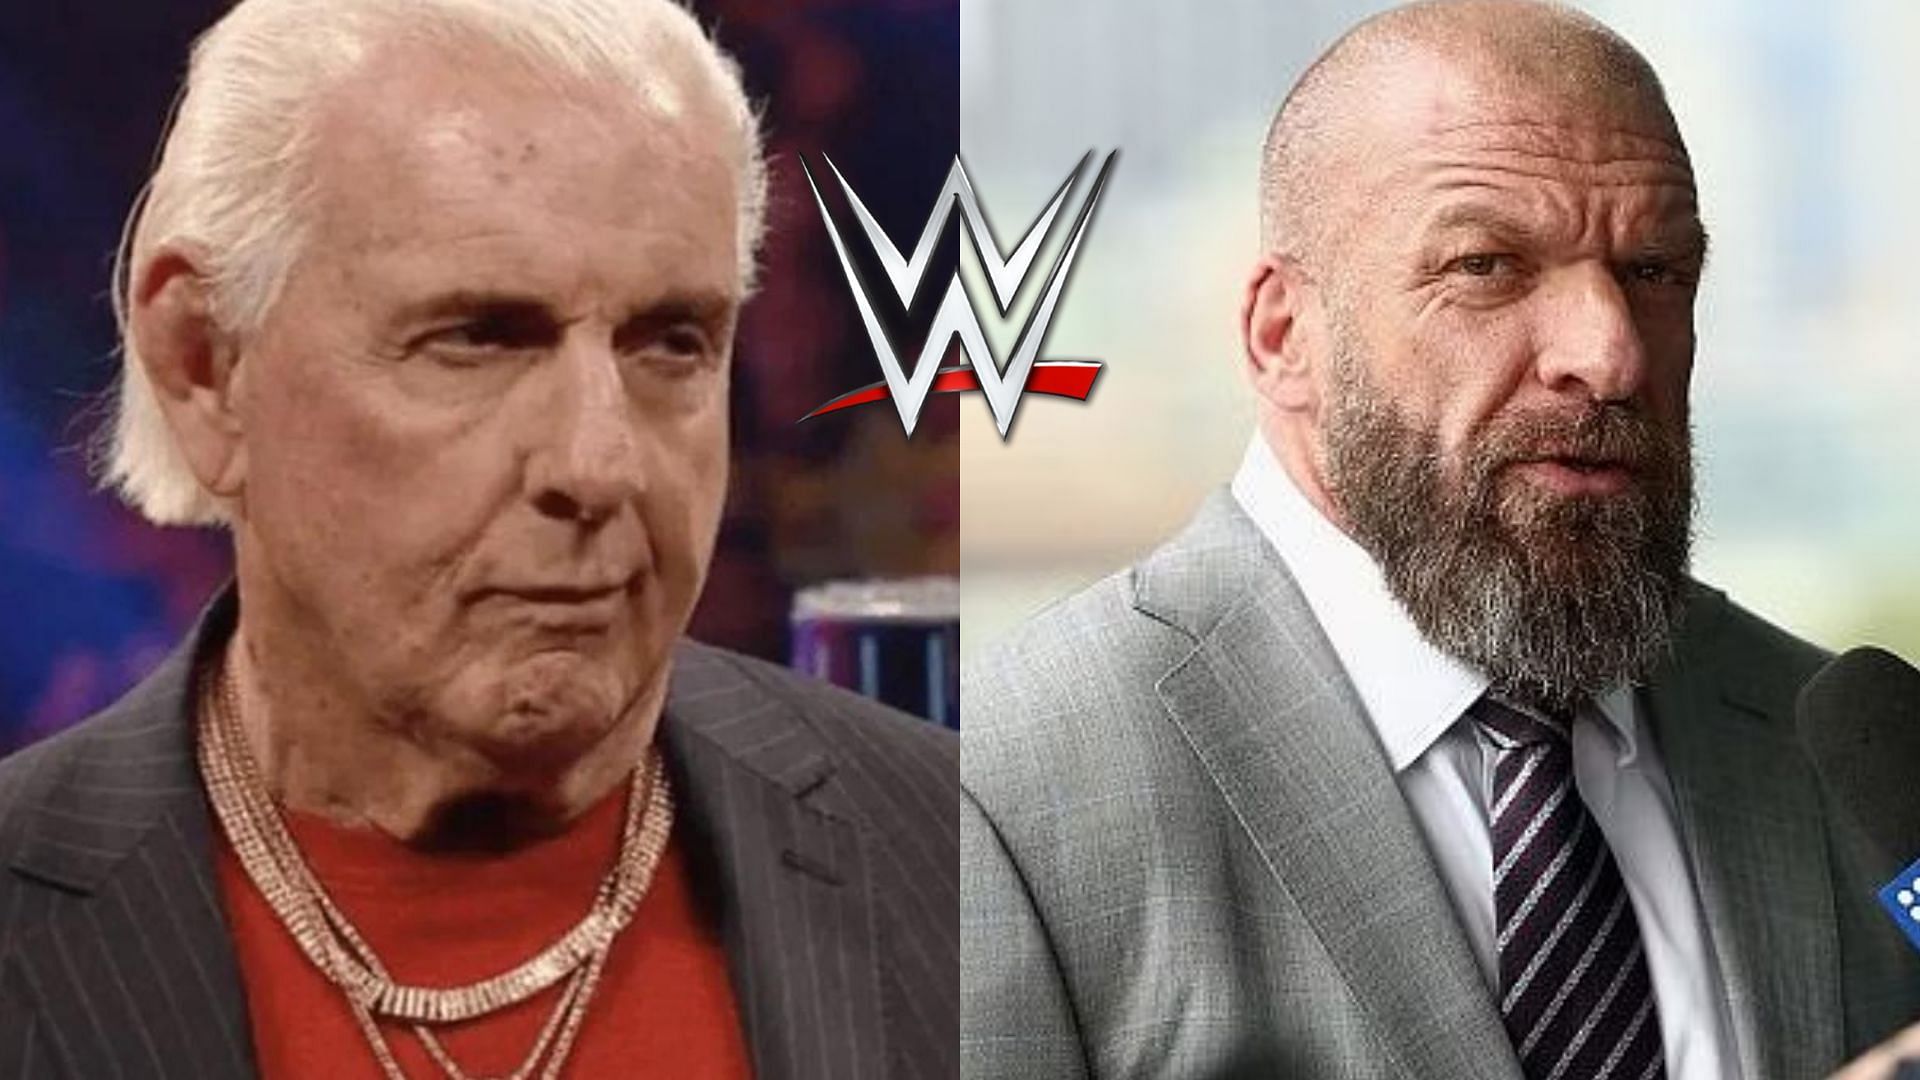 Ric Flair (left) Triple H (right)